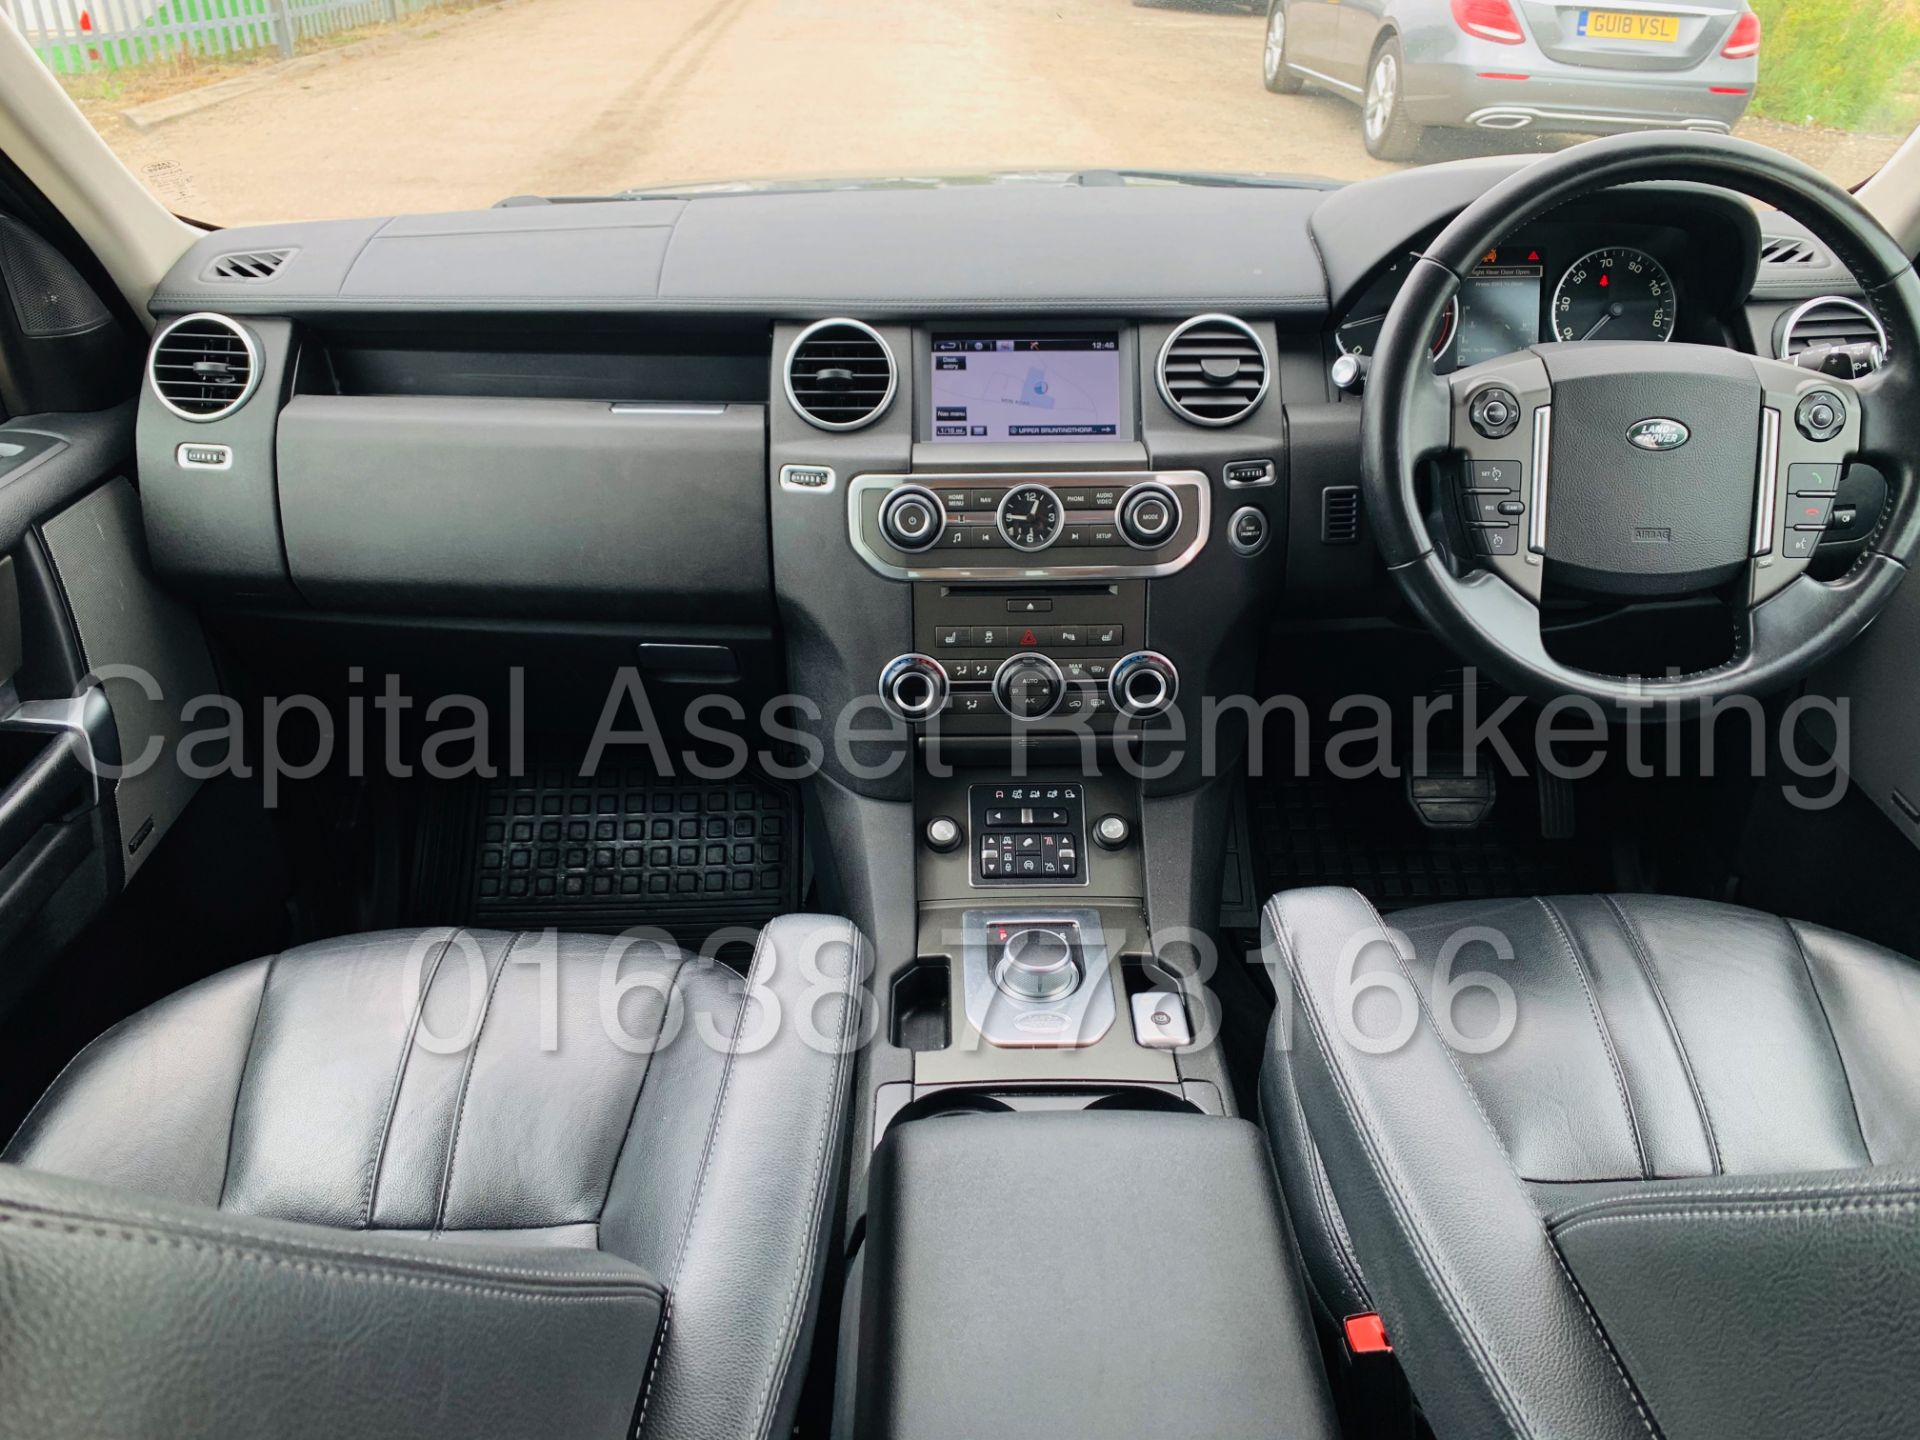 (On Sale) LAND ROVER DISCOVERY 4 *SE TECH* 7 SEATER SUV (2016) '3.0 SDV6 - 8 SPEED AUTO' (1 OWNER) - Image 31 of 53